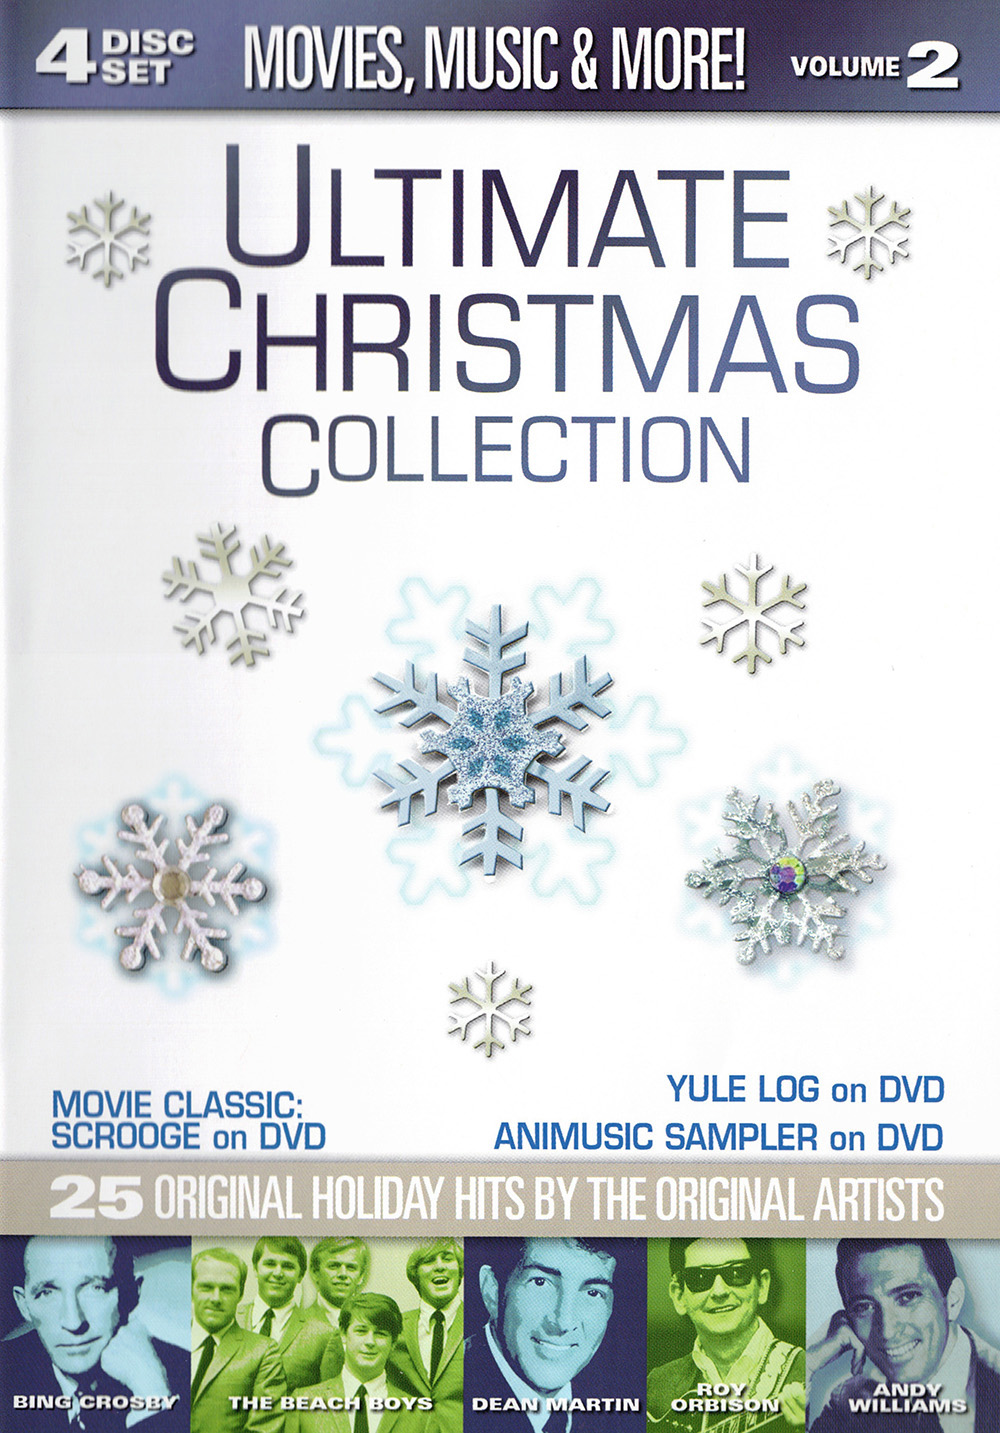 Ultimate Christmas Collection, Vol. 2 (4 CD)